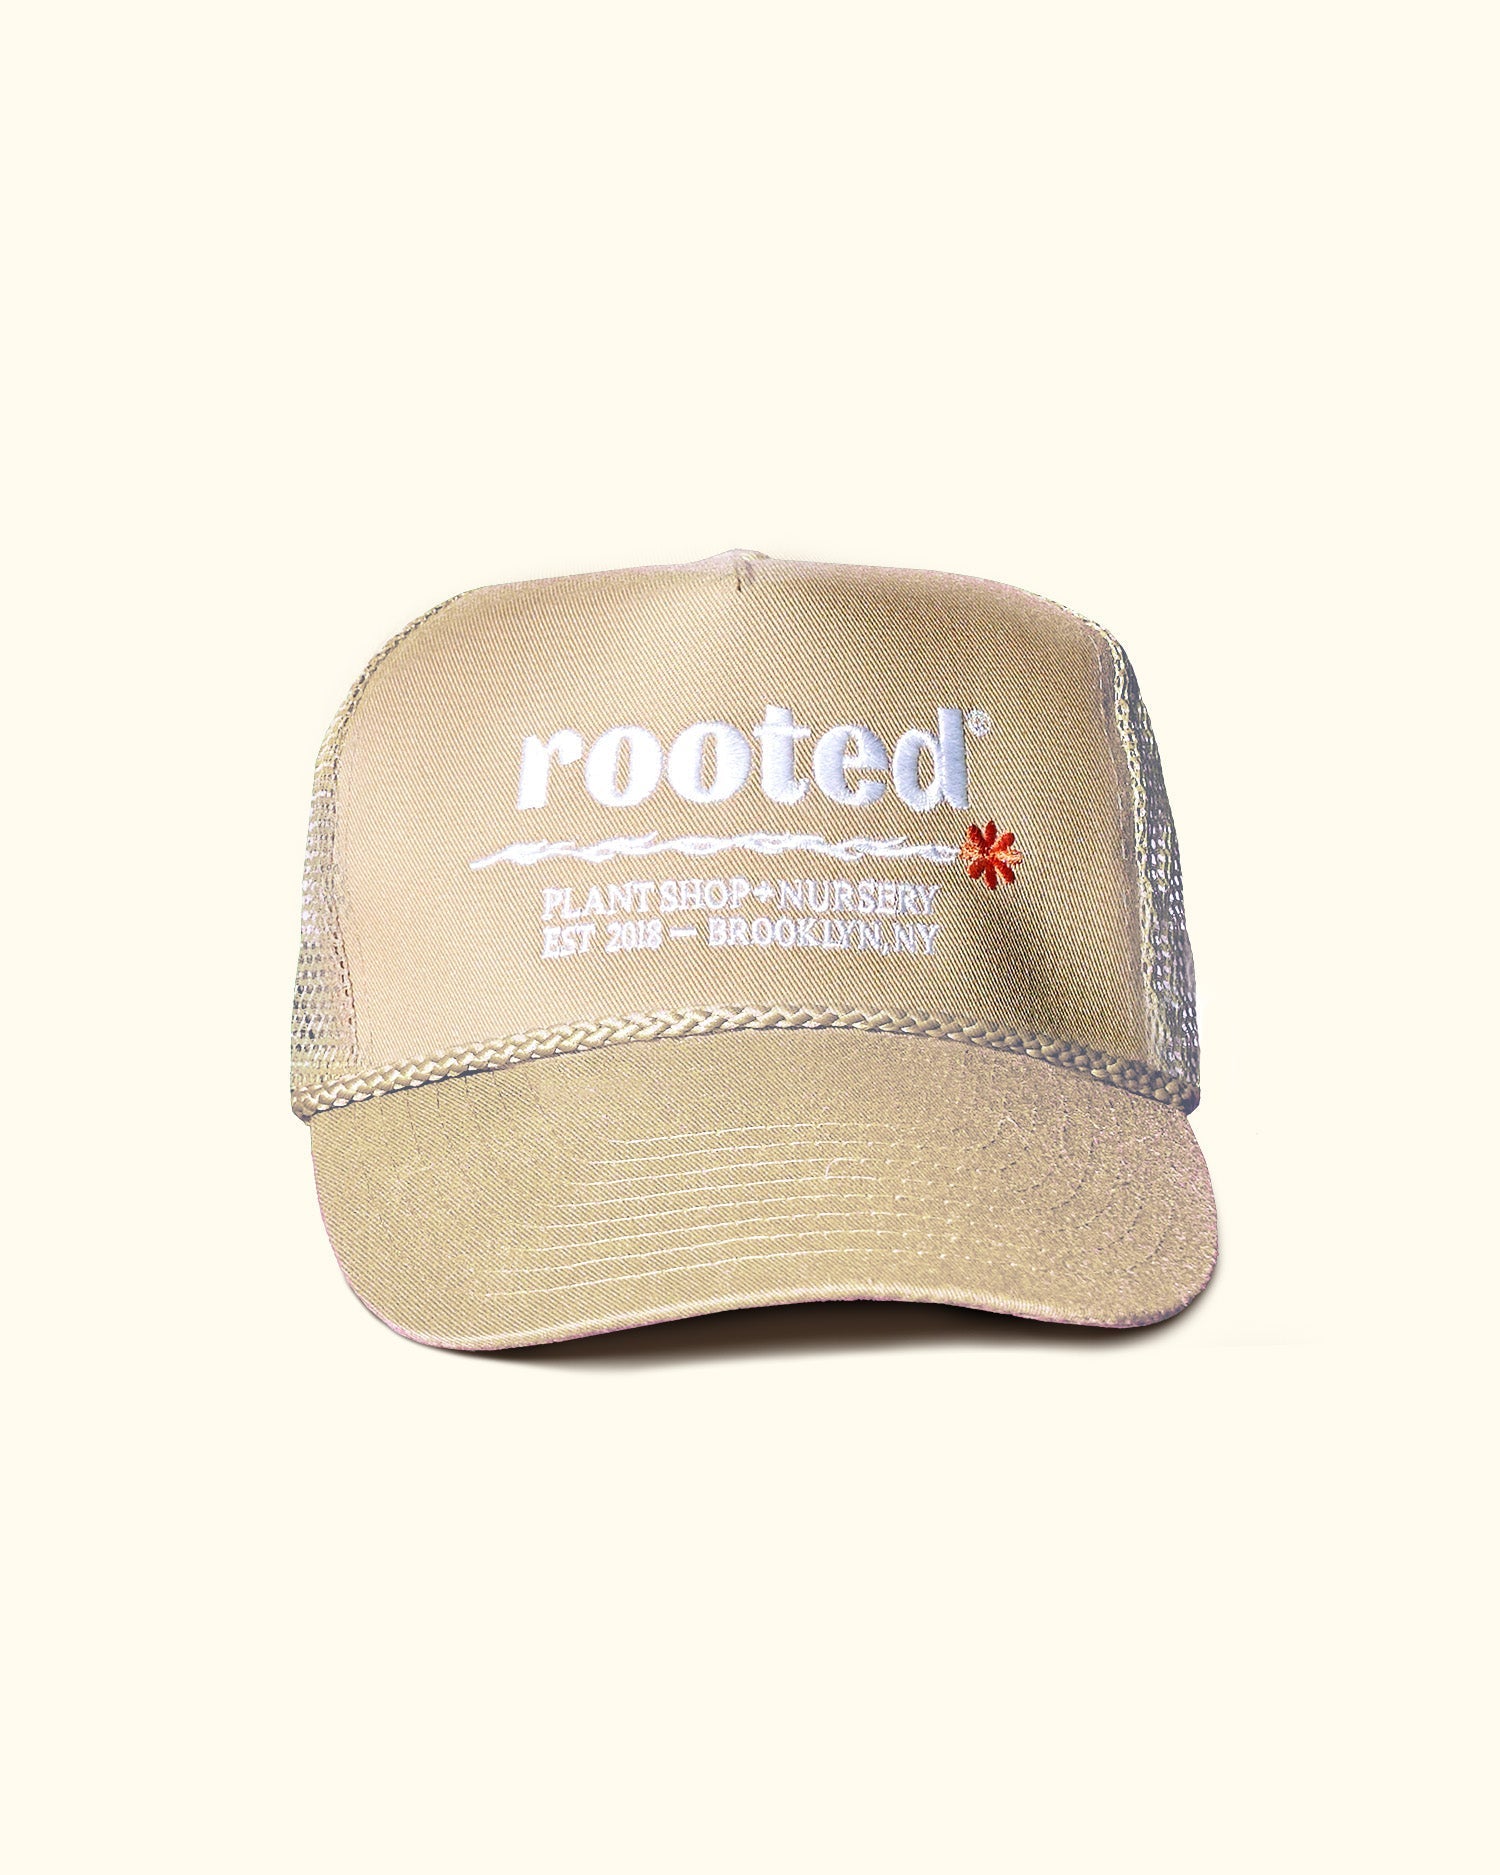 A khaki-colored trucker hat that reads: Rooted Plant shop and nursery. Est. 2018 - Brooklyn, NY